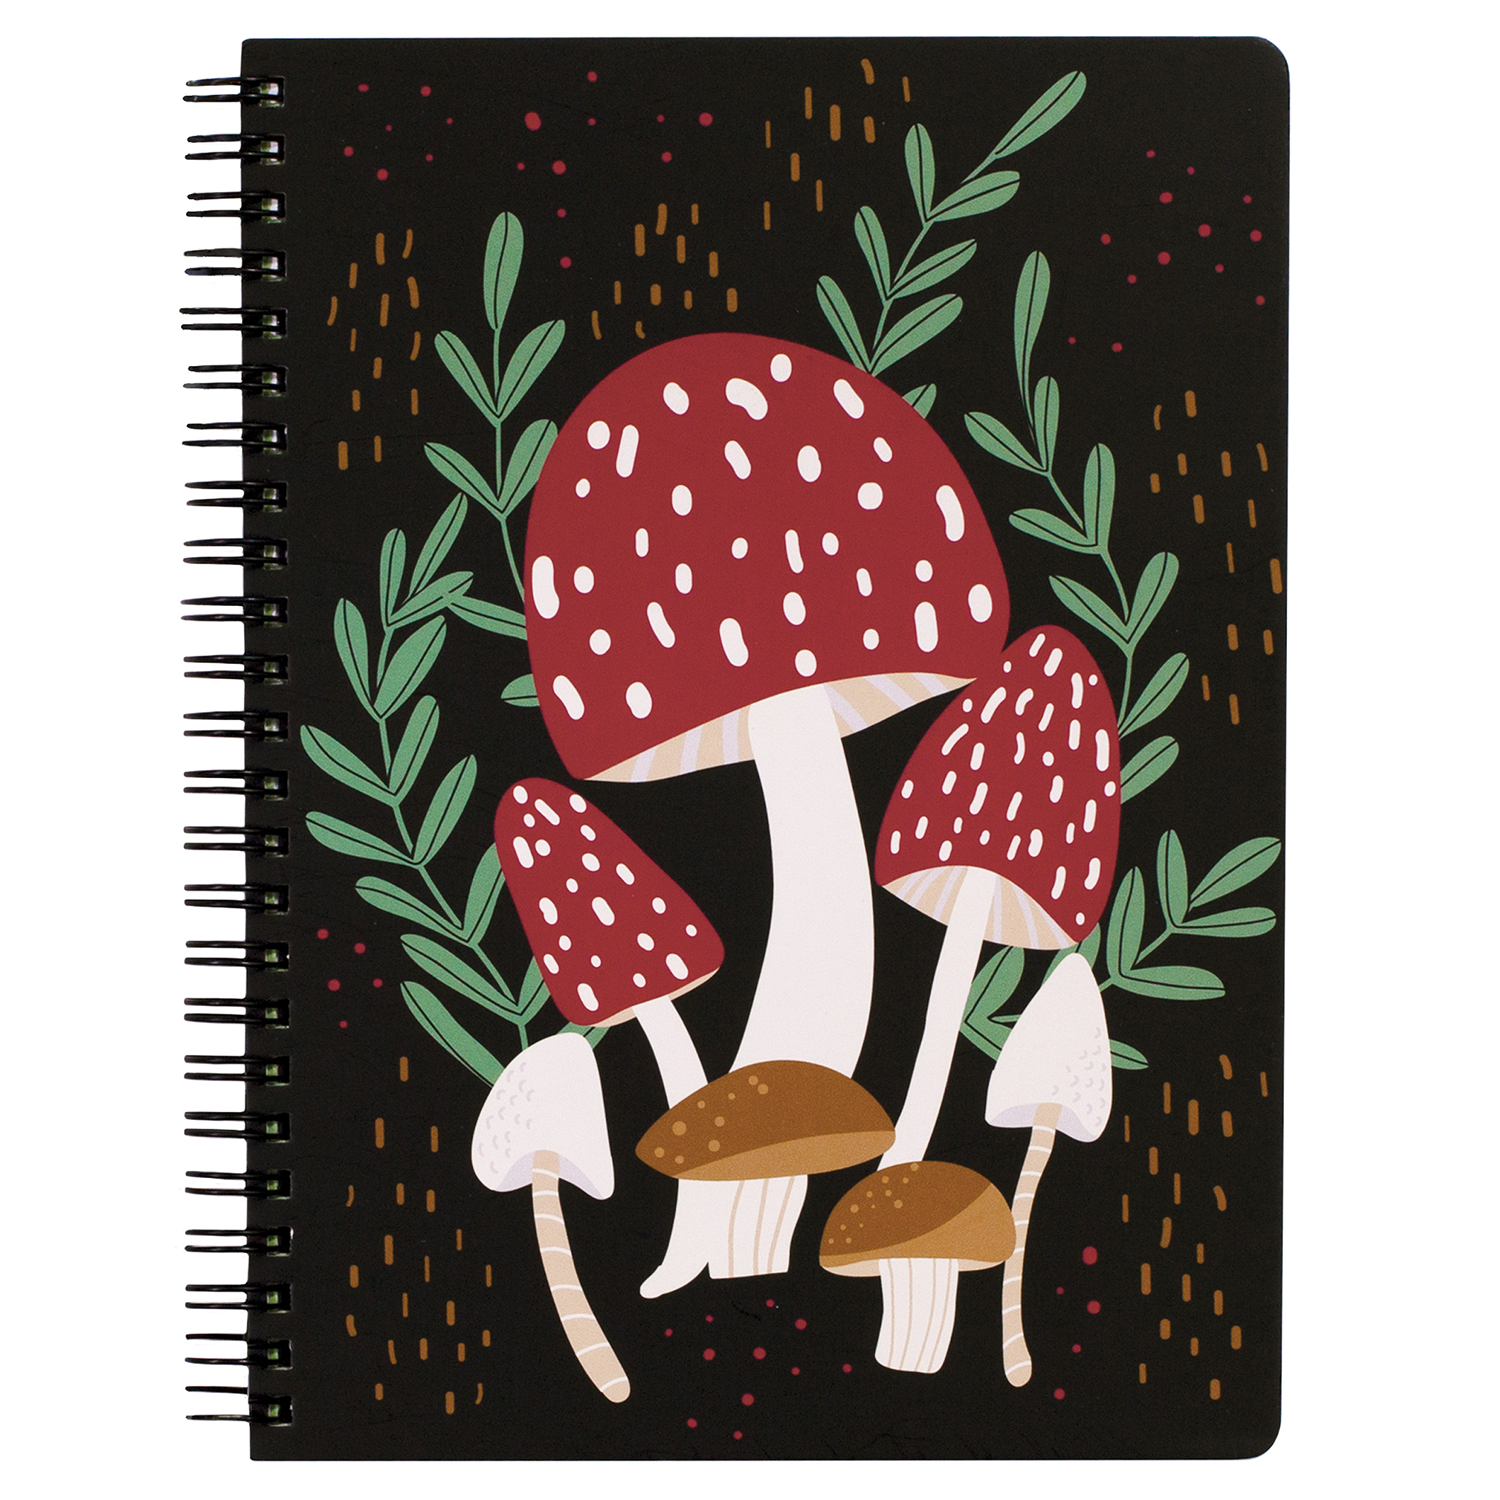 black mini spiral notebook with mushrooms on hardcover, metal spiral and 160 lined pages for school or office supplies